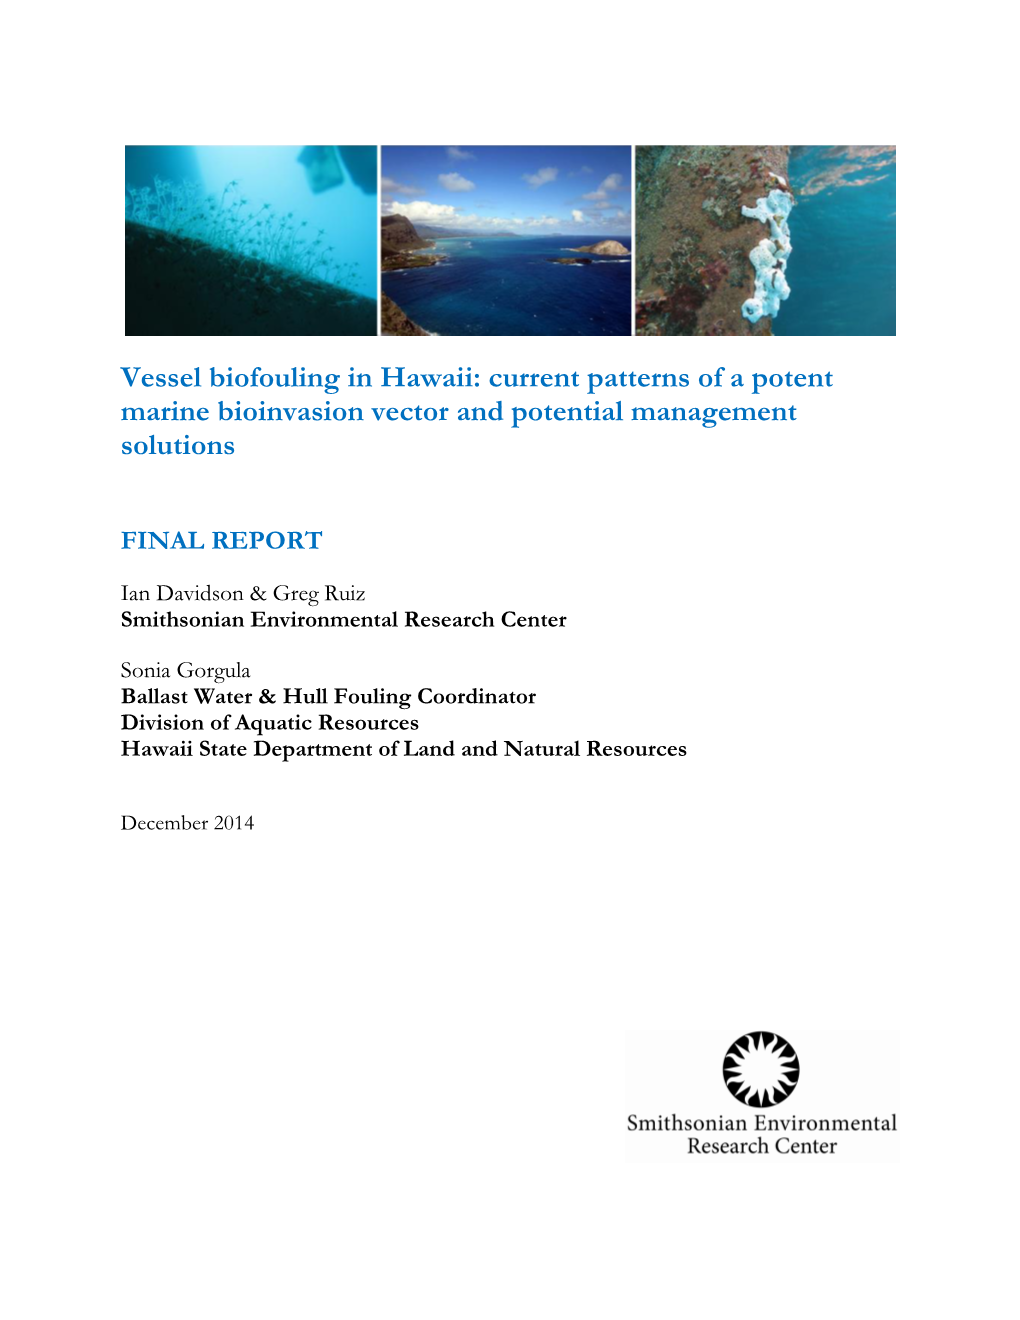 Vessel Biofouling in Hawaii: Current Patterns of a Potent Marine Bioinvasion Vector and Potential Management Solutions